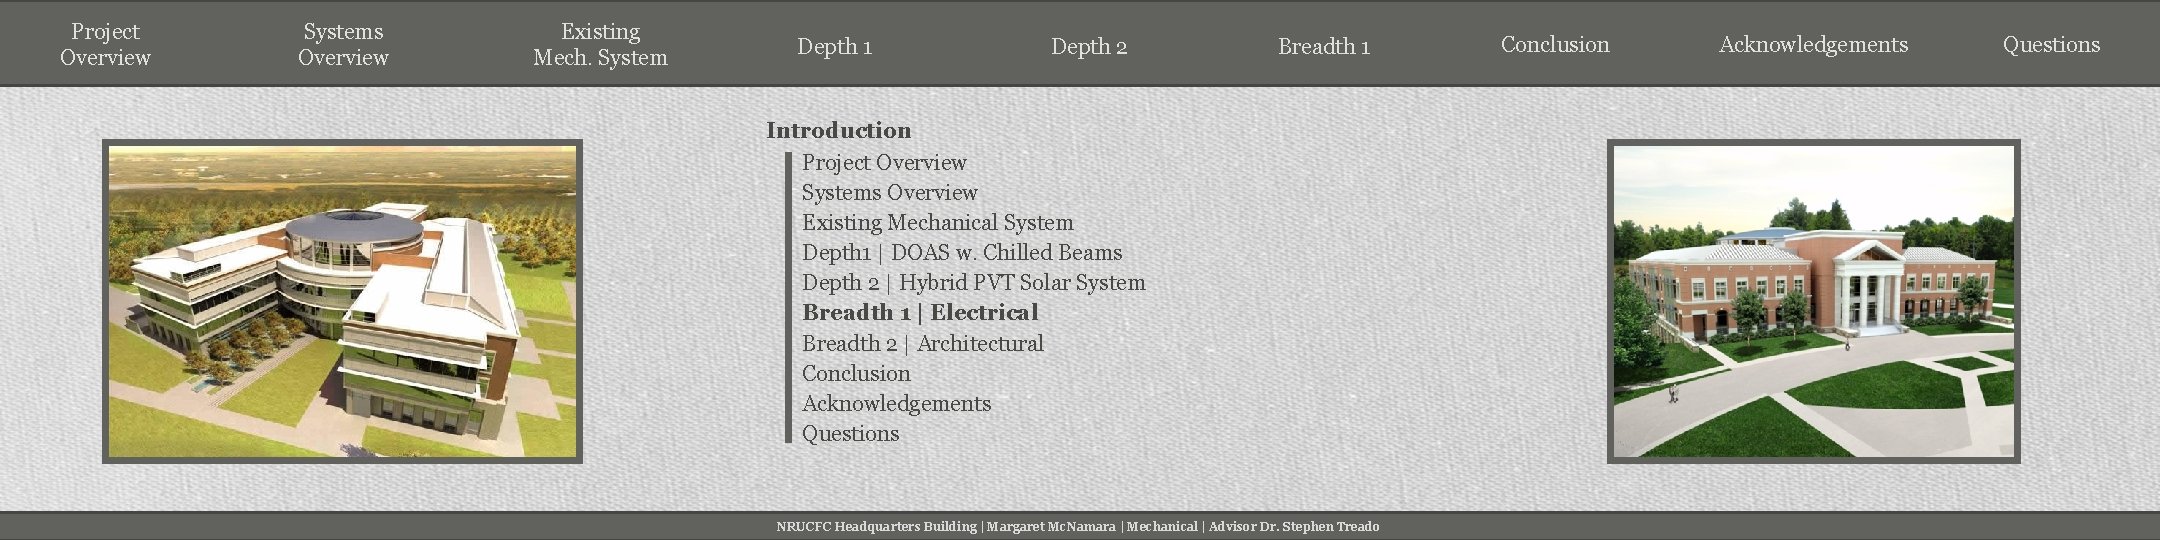 Project Overview Systems Overview Existing Mech. System Depth 1 Depth 2 Breadth 1 Introduction